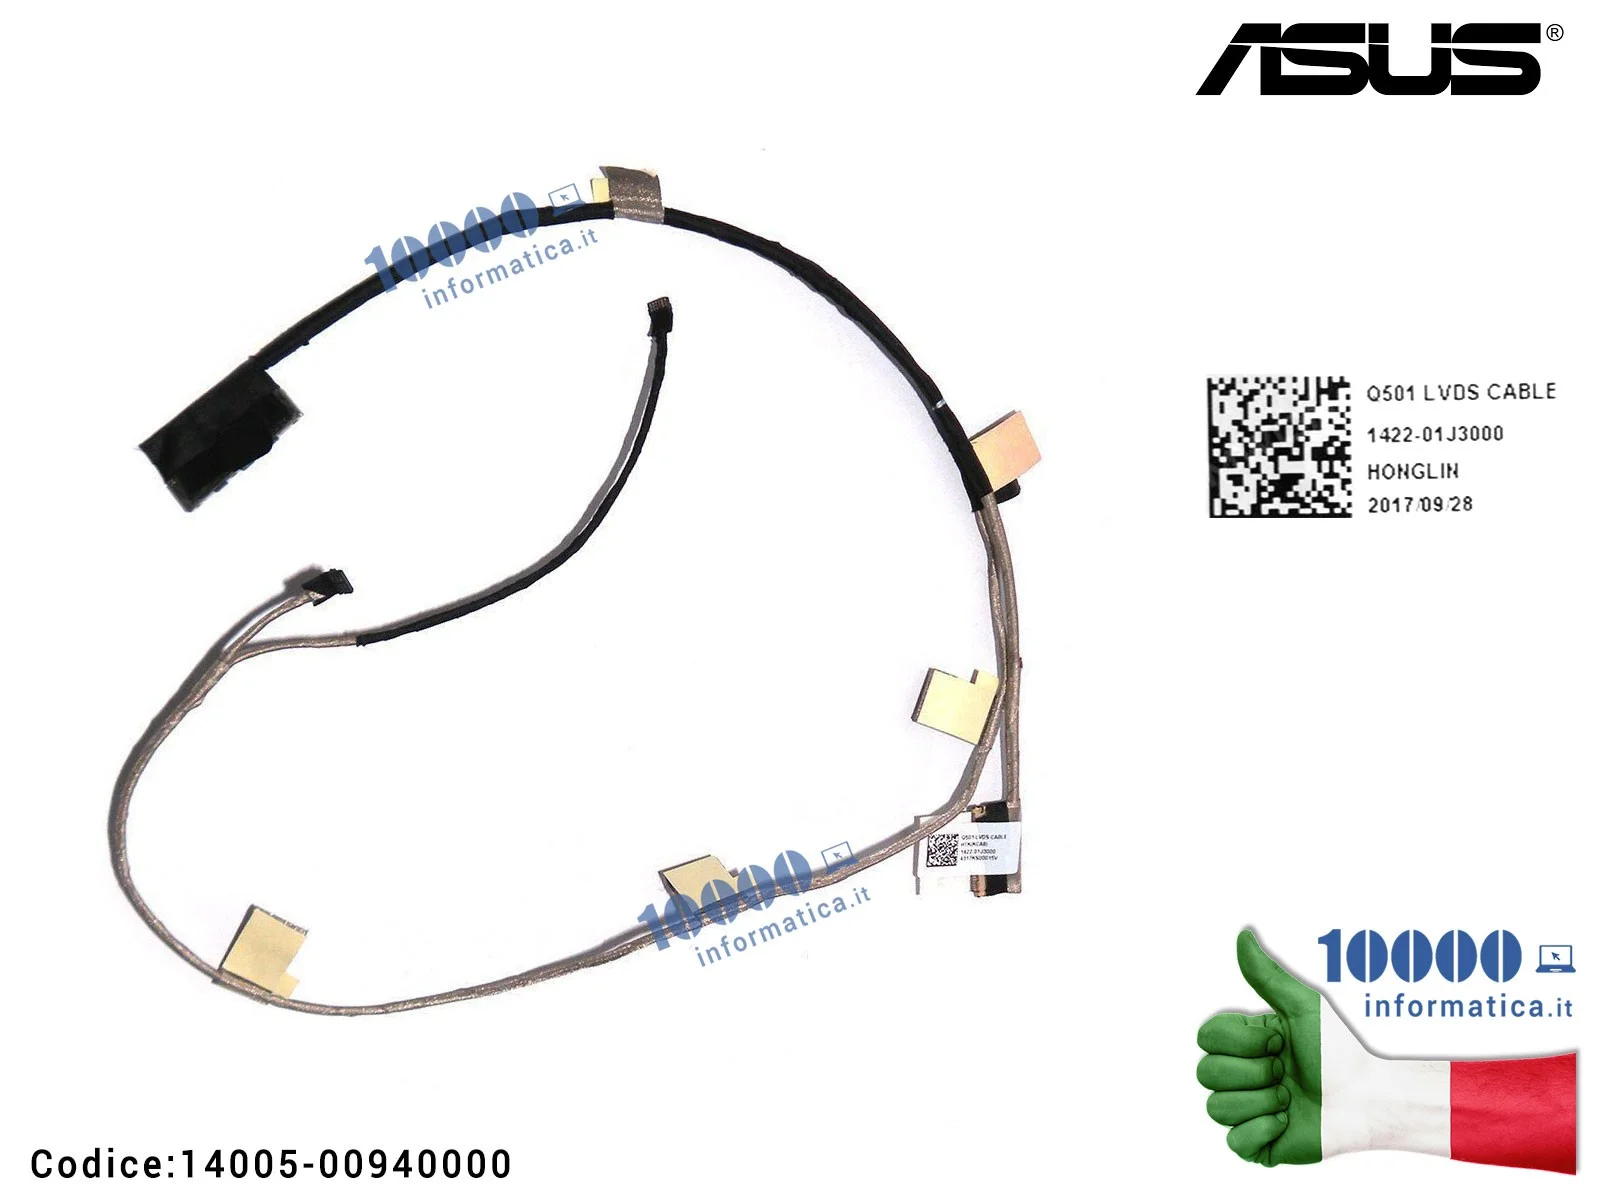 14005-00940000 Cavo Flat LCD ASUS Q501 Q501L Q501LA N541 N541L N541LA 1422-01J3000 (Full-HD) HONGLING LVDS CABLE